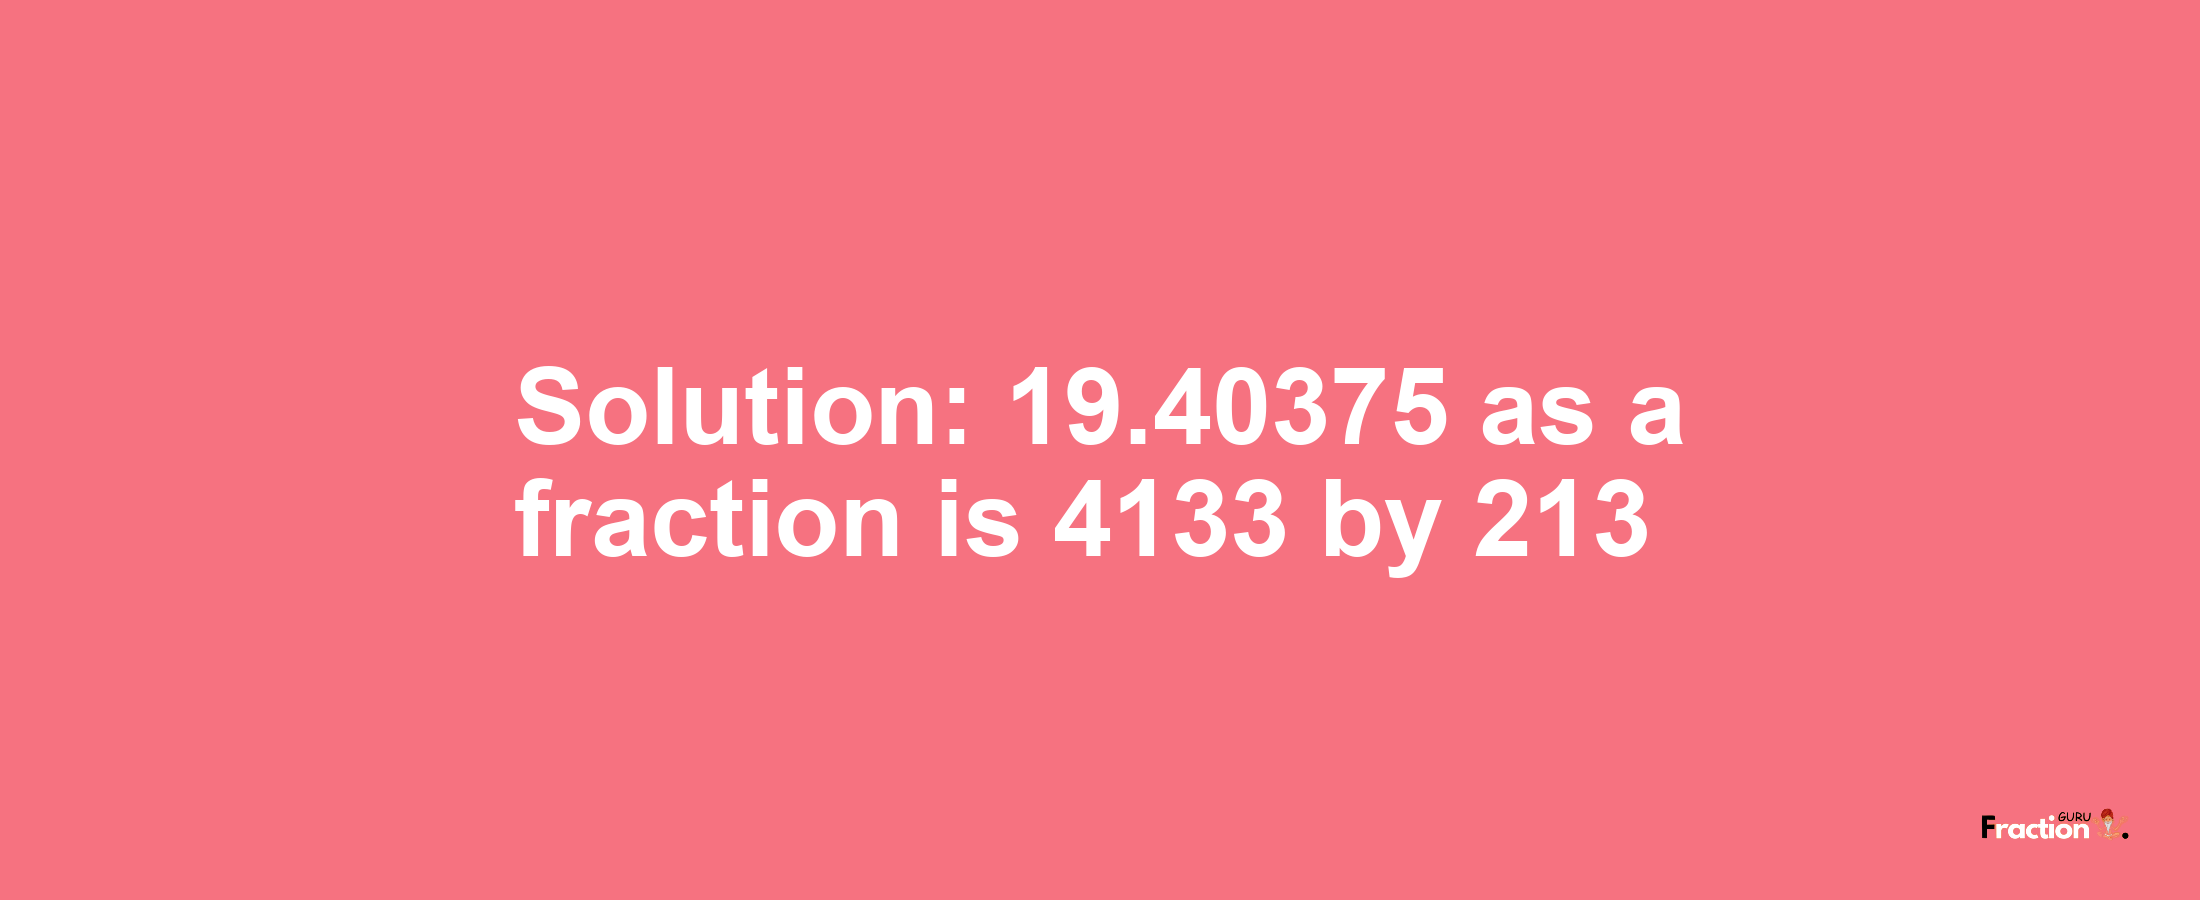 Solution:19.40375 as a fraction is 4133/213